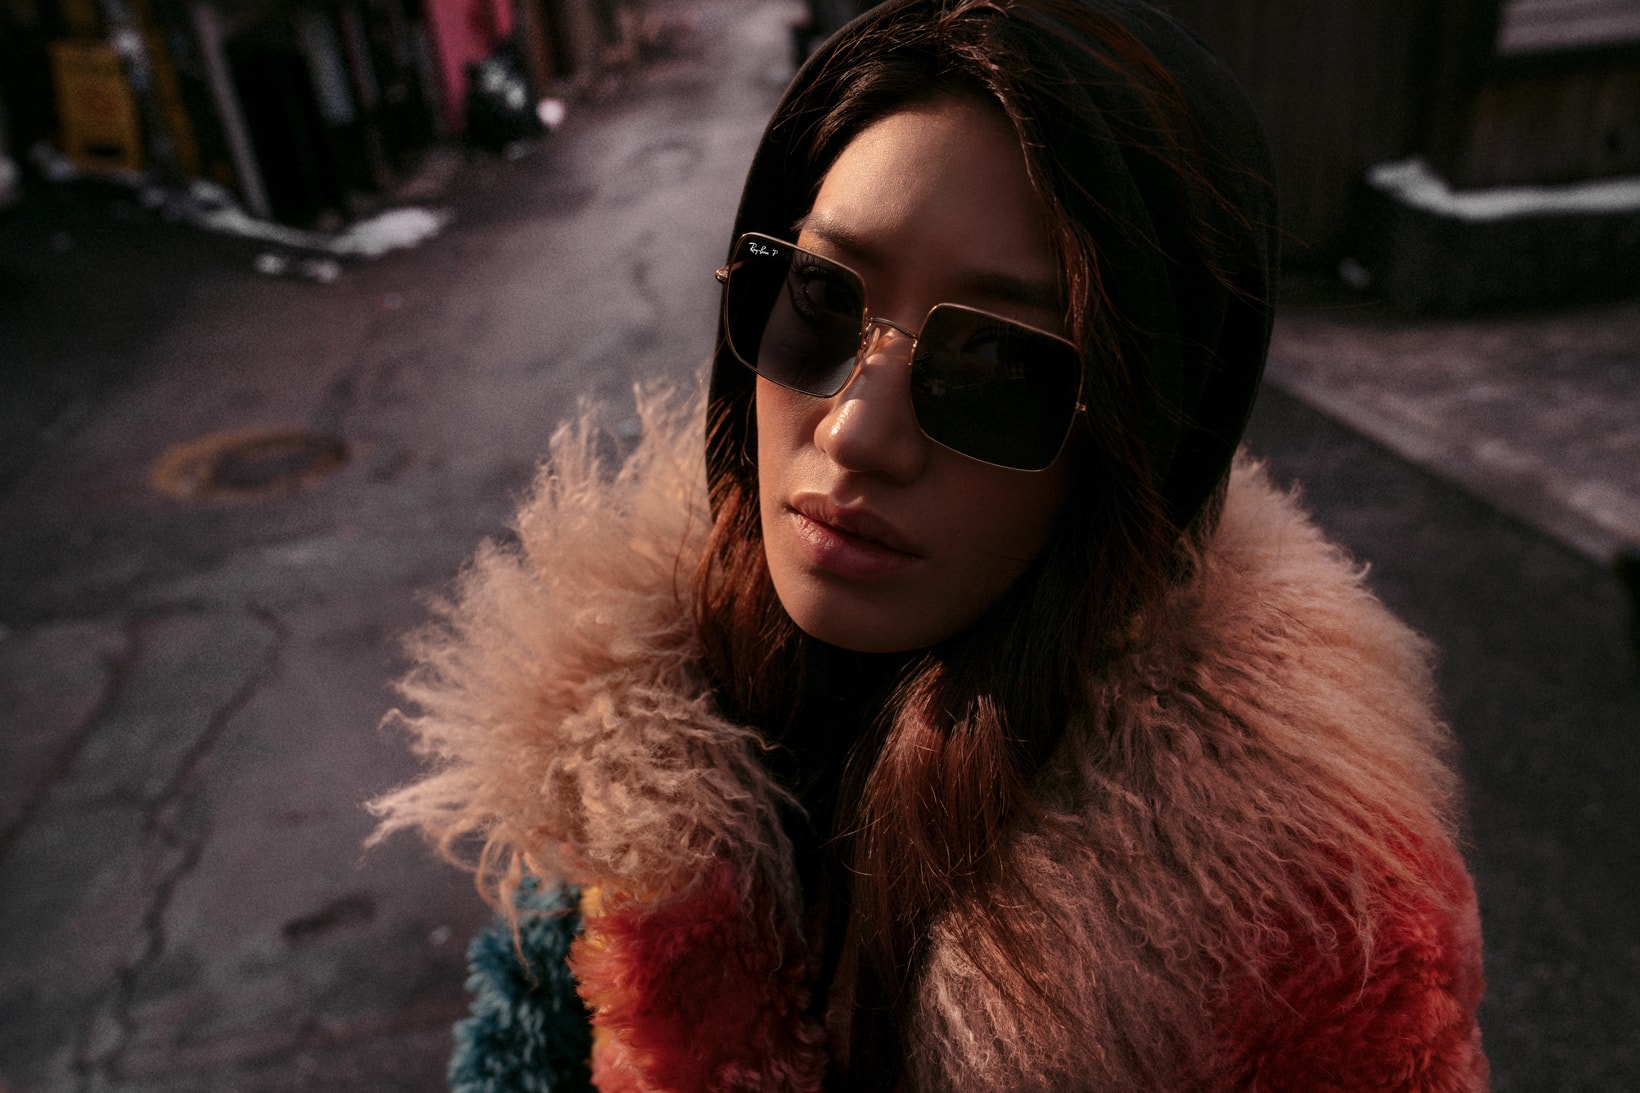 Peggy Gou x Ray Ban Sunglasses Collection Square Gray Classic